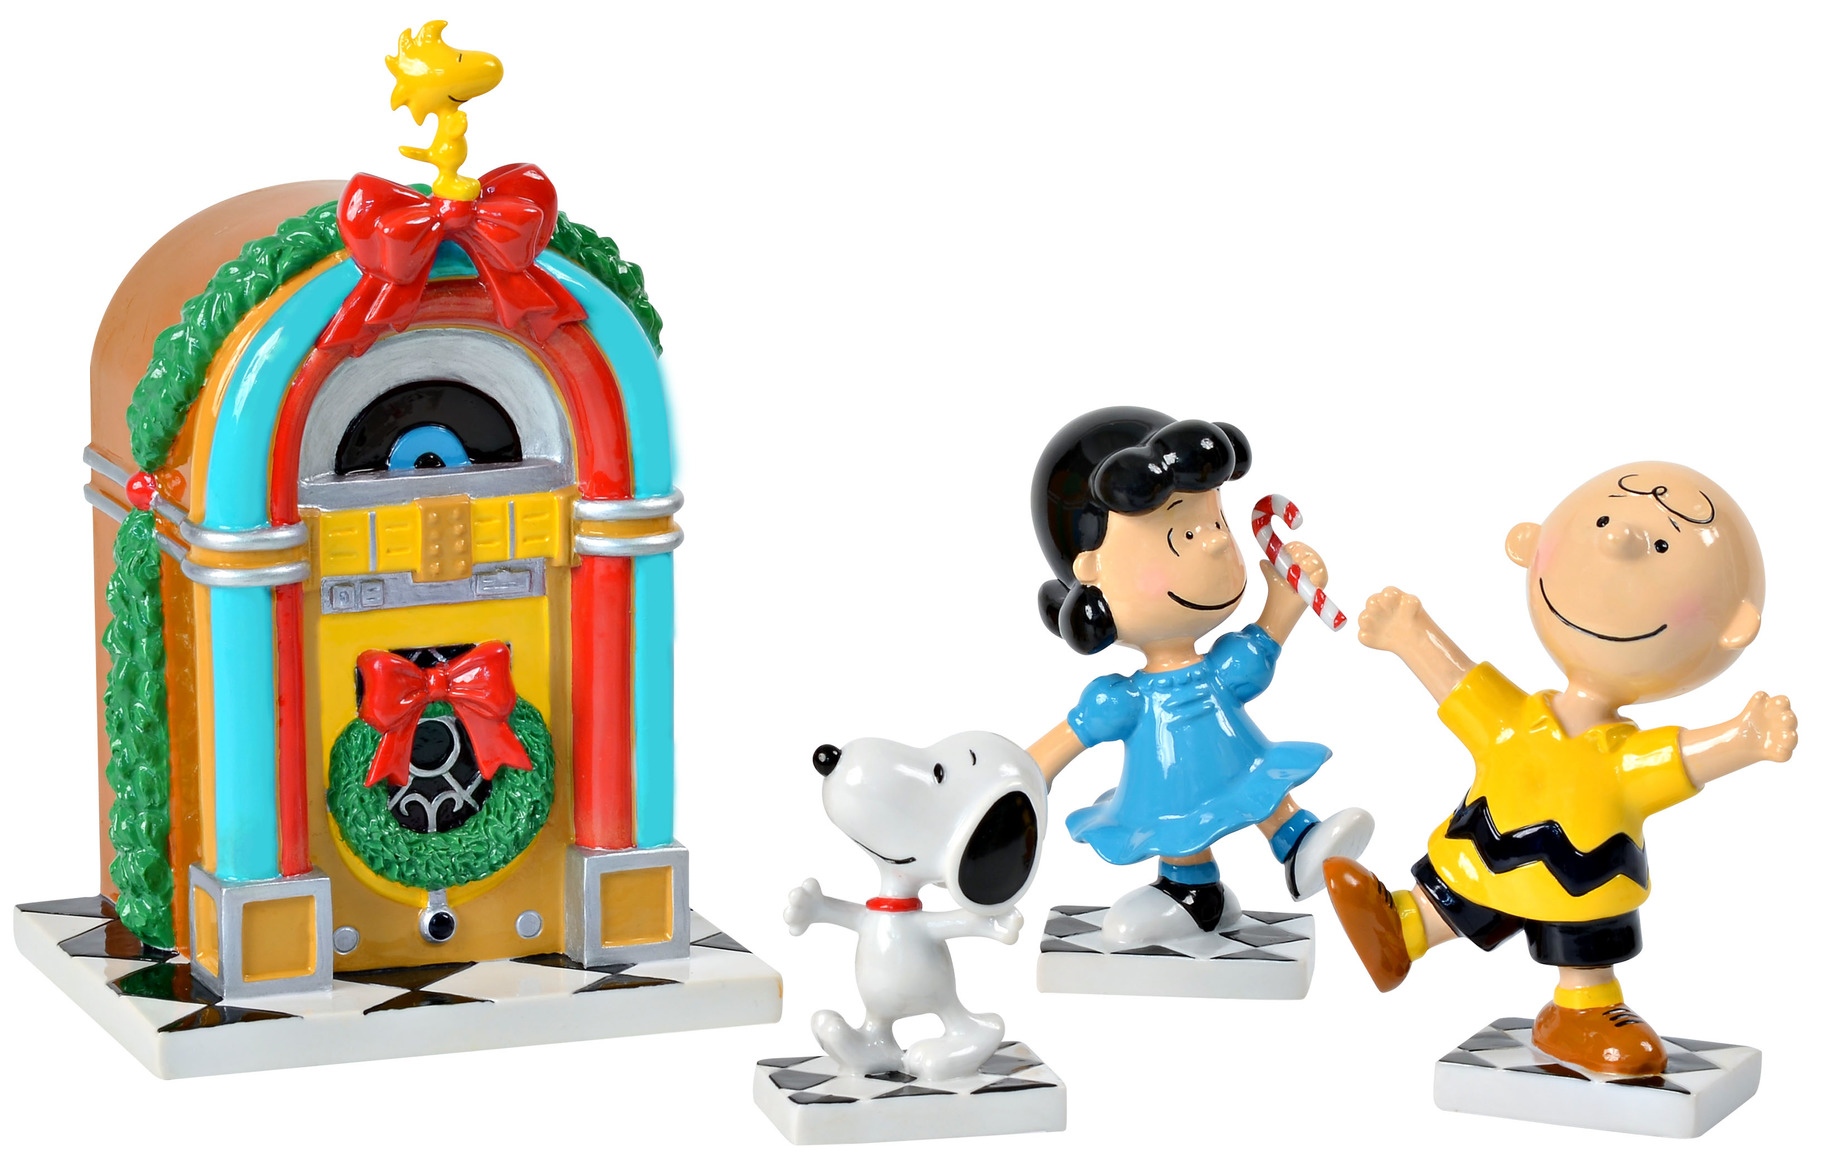 Peanuts by Department 56 6000353 Peanuts Juke Box Party Set of 4